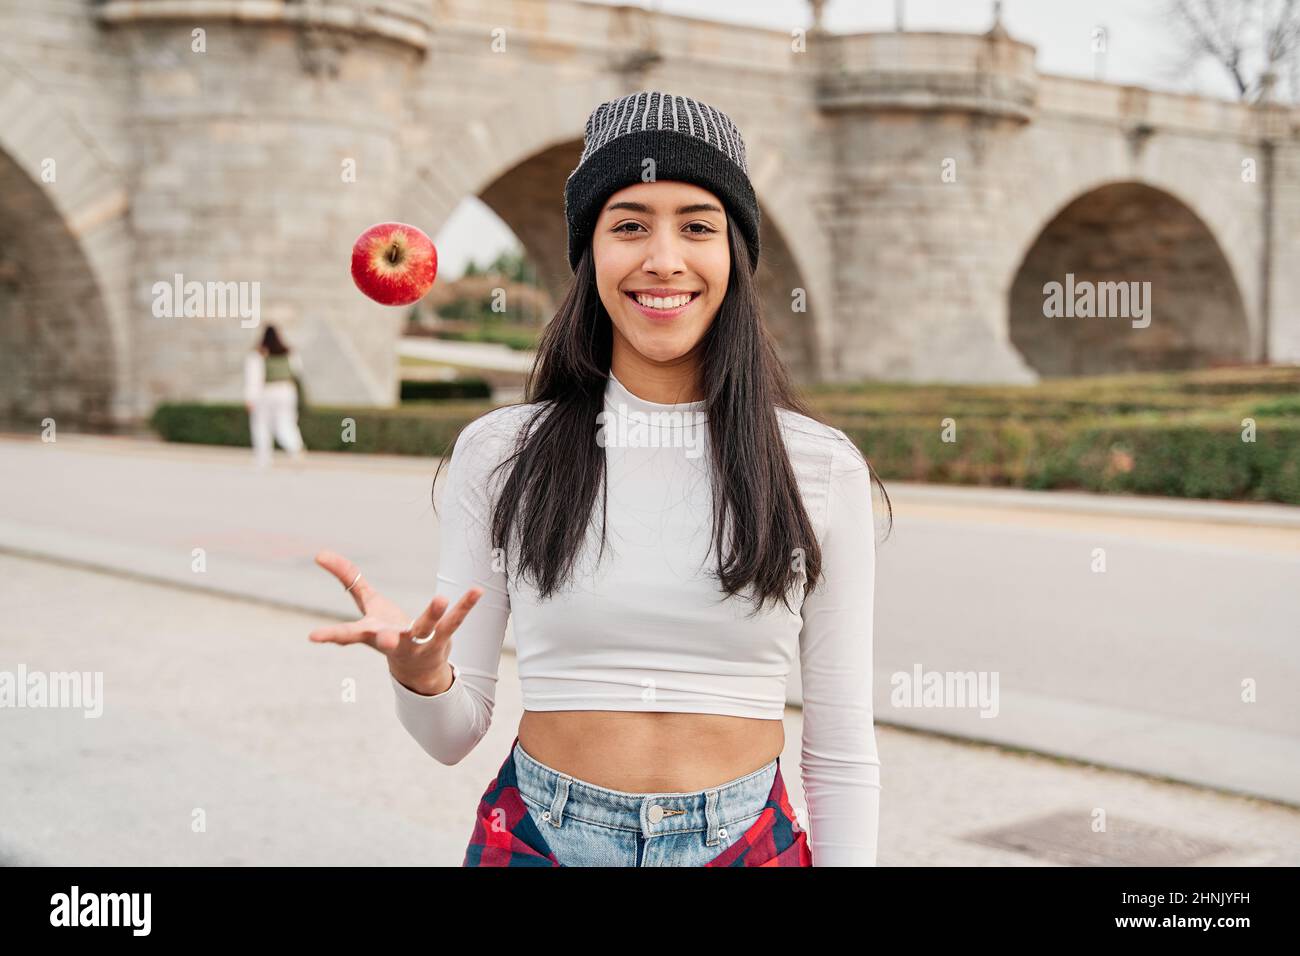 young latin woman smiling and throwing an apple Stock Photo